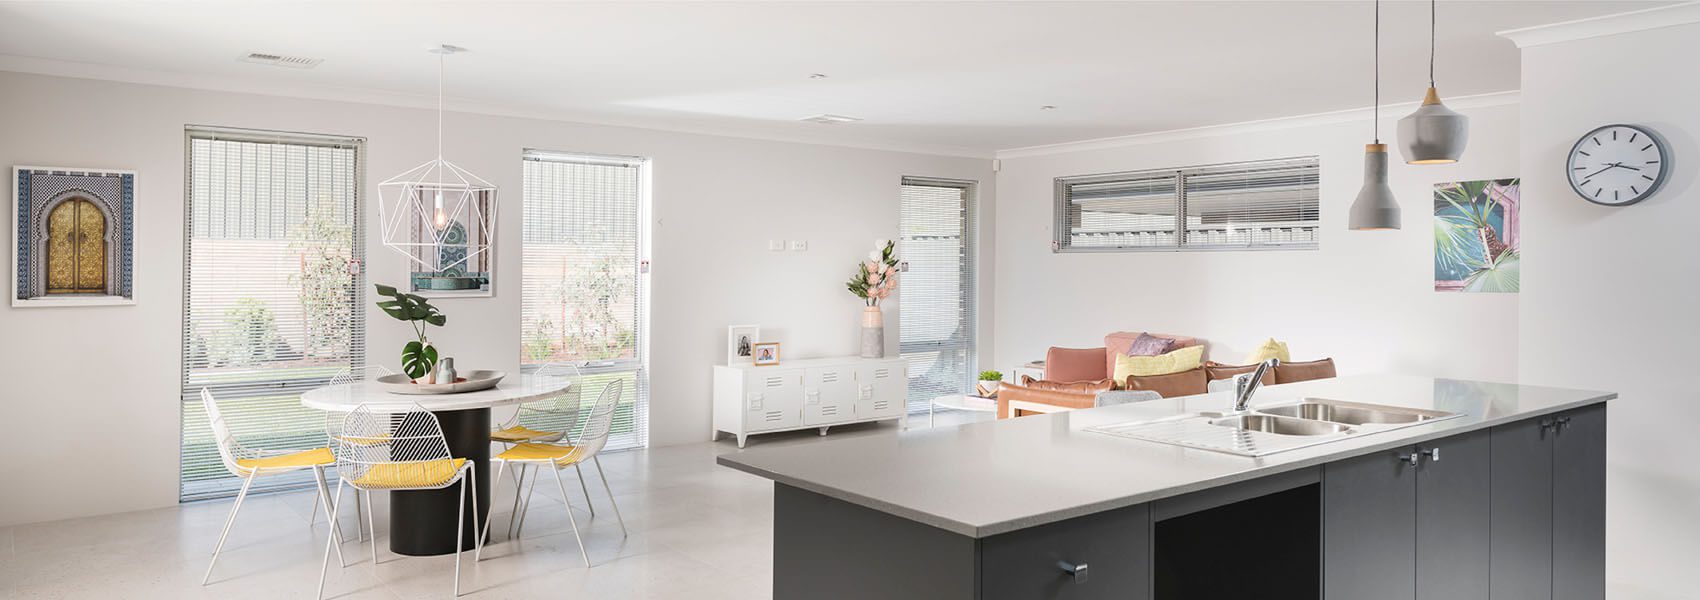 Kitchen in Move Homes' Rosehill Water display on Serpentine Drive, South Guildford